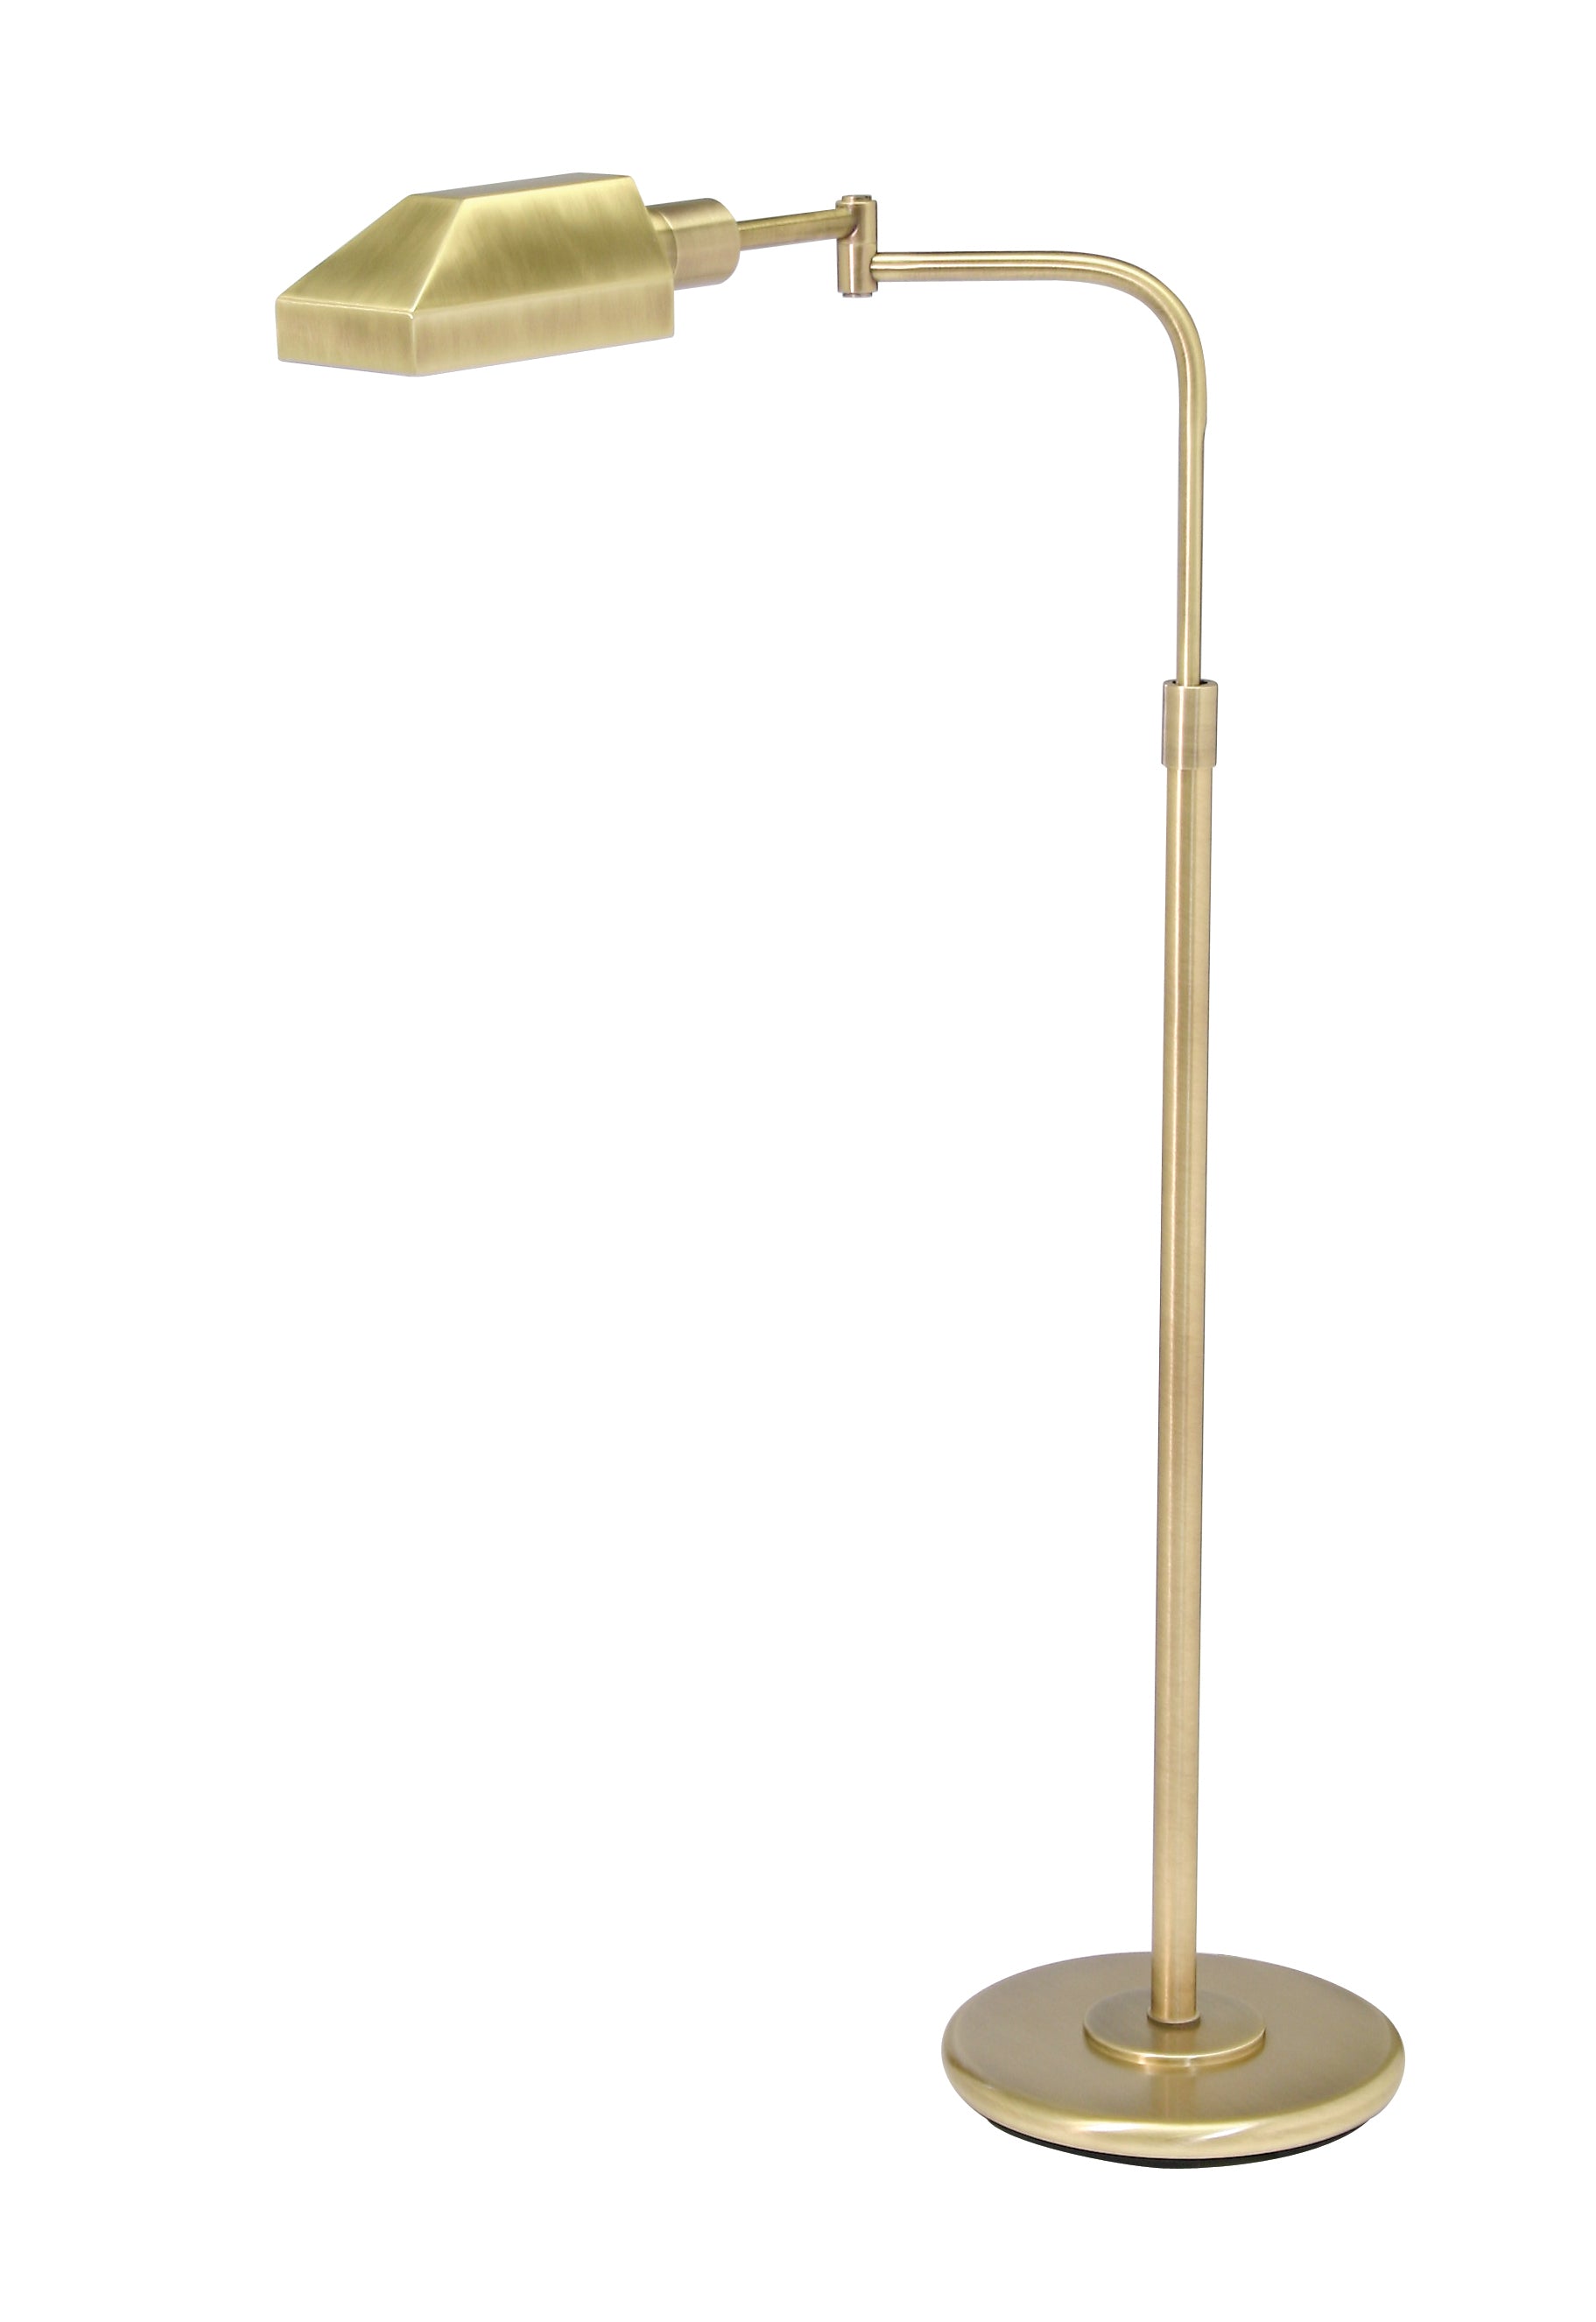 House of Troy Home/Office Antique Brass Floor Lamp PH100-71J